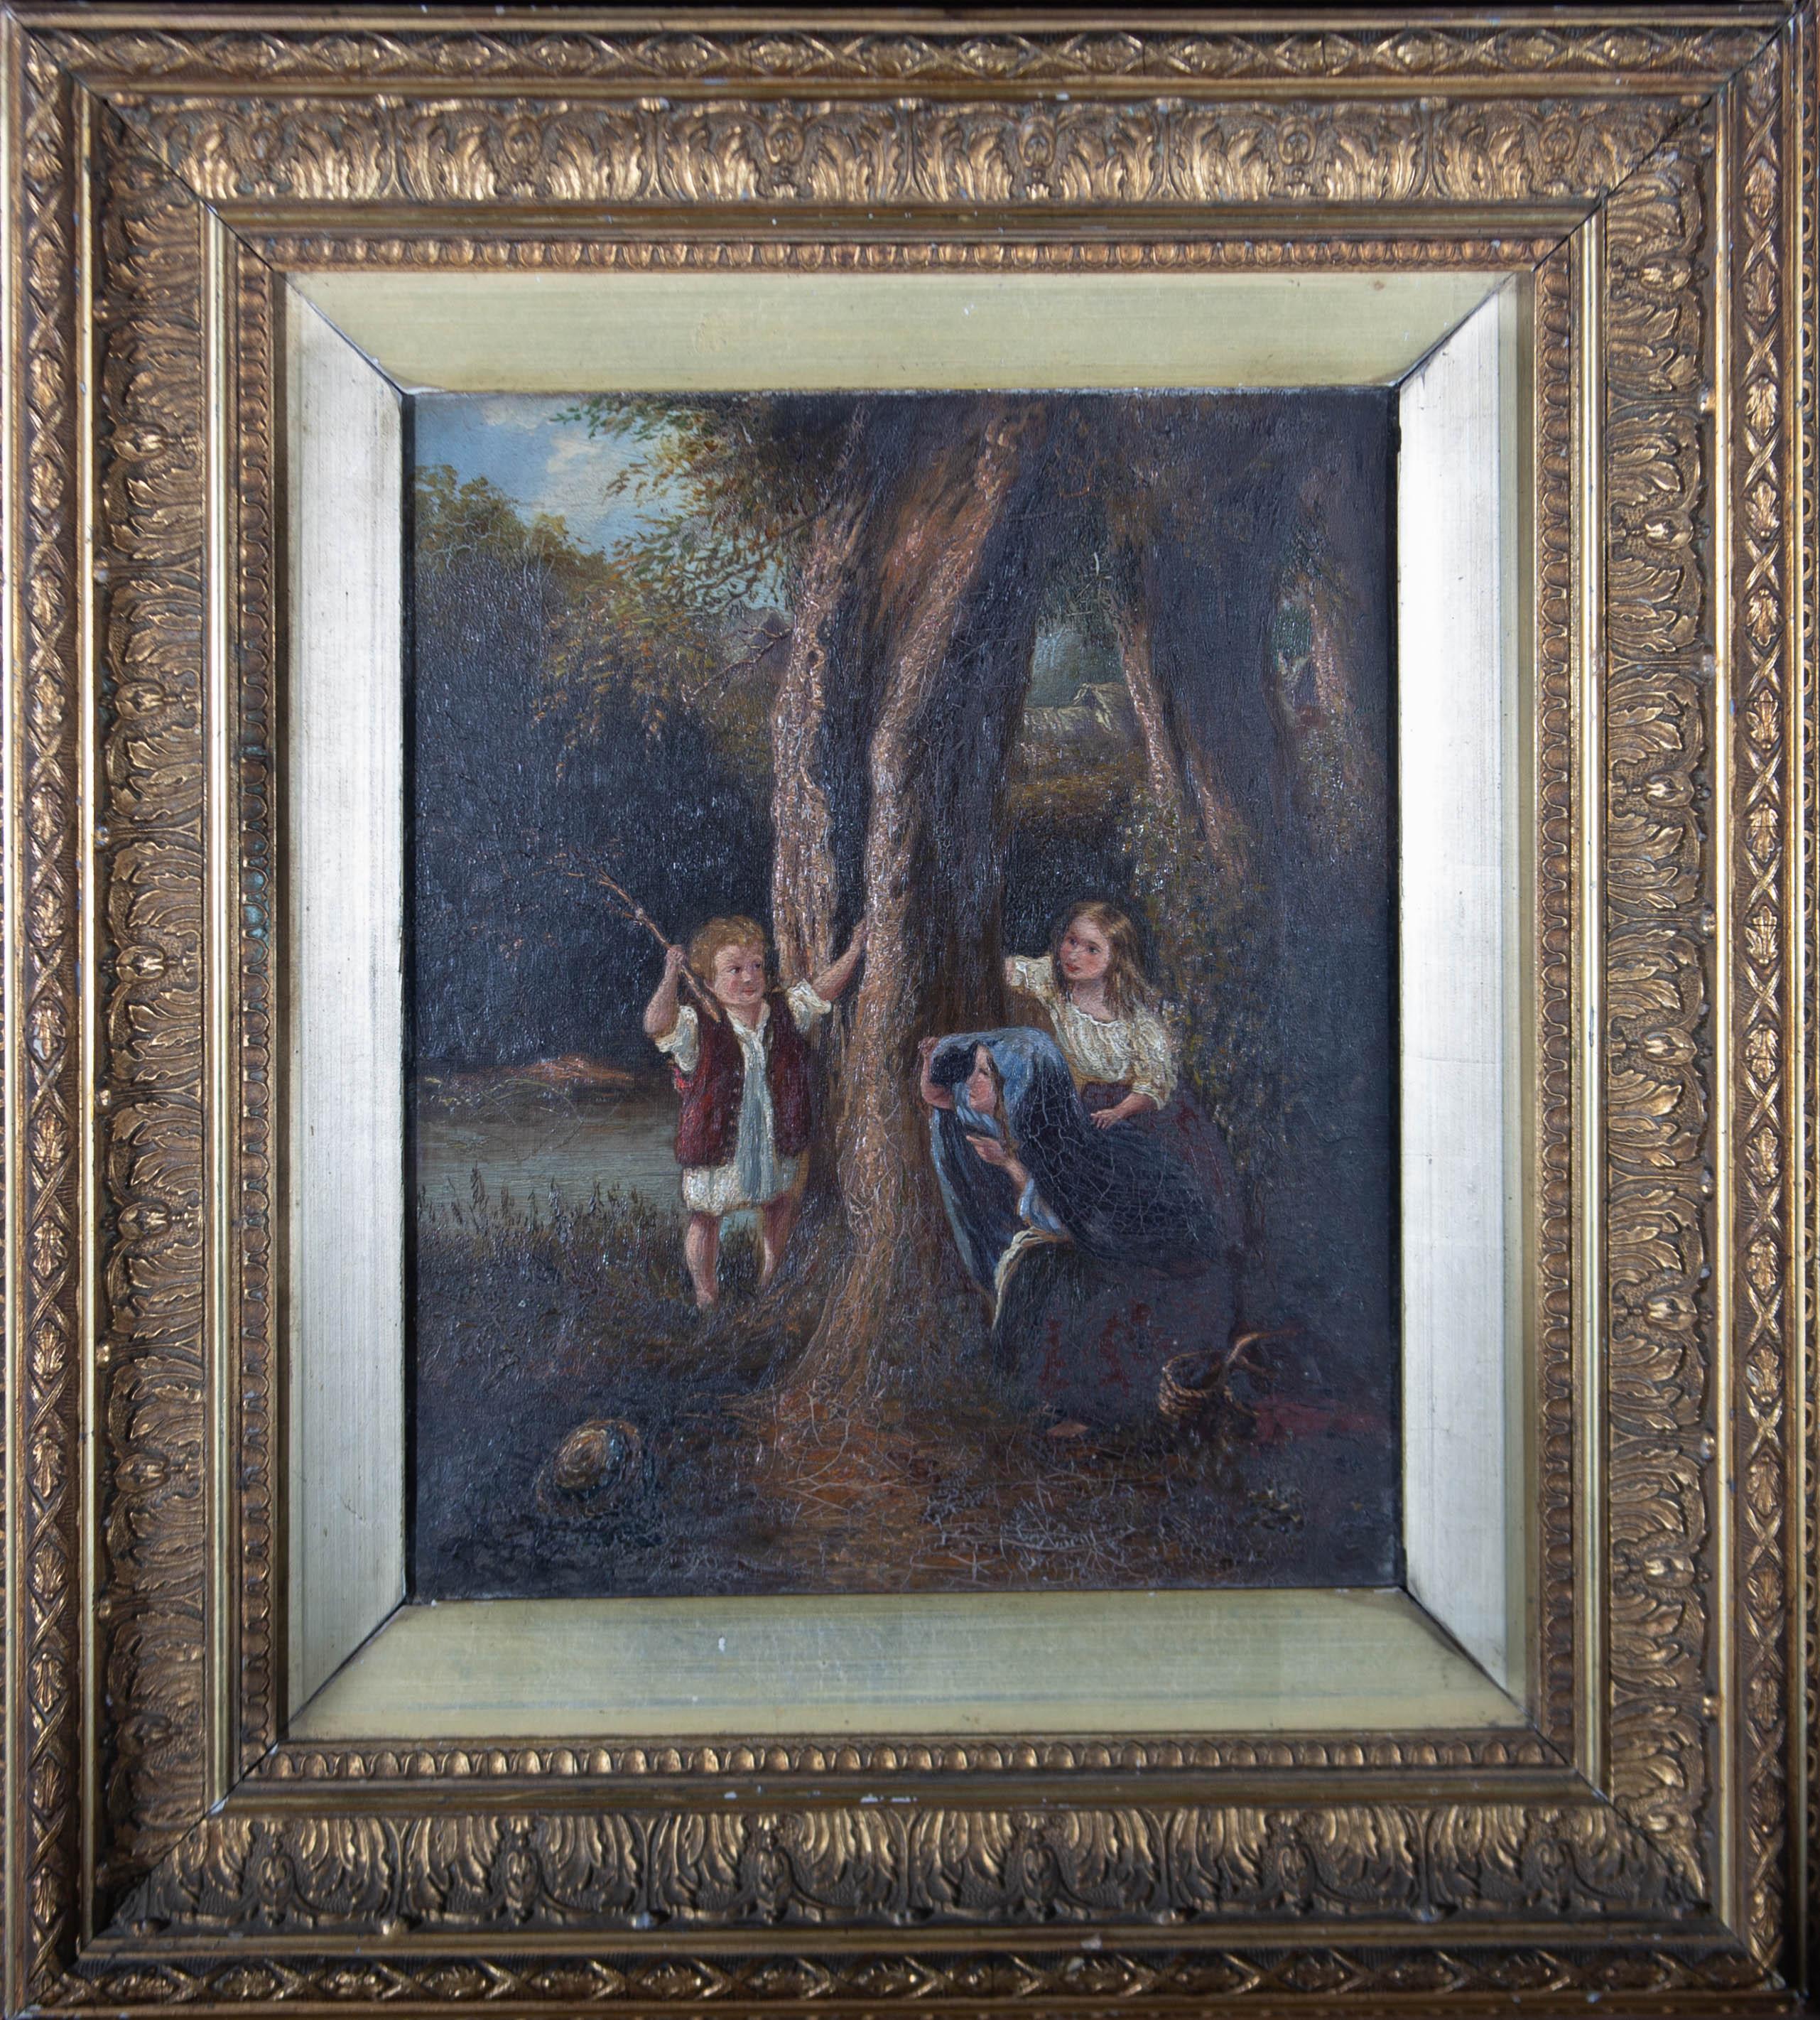 Unknown Figurative Painting - Ornate Framed Mid 19th Century Oil - The Woodland Game